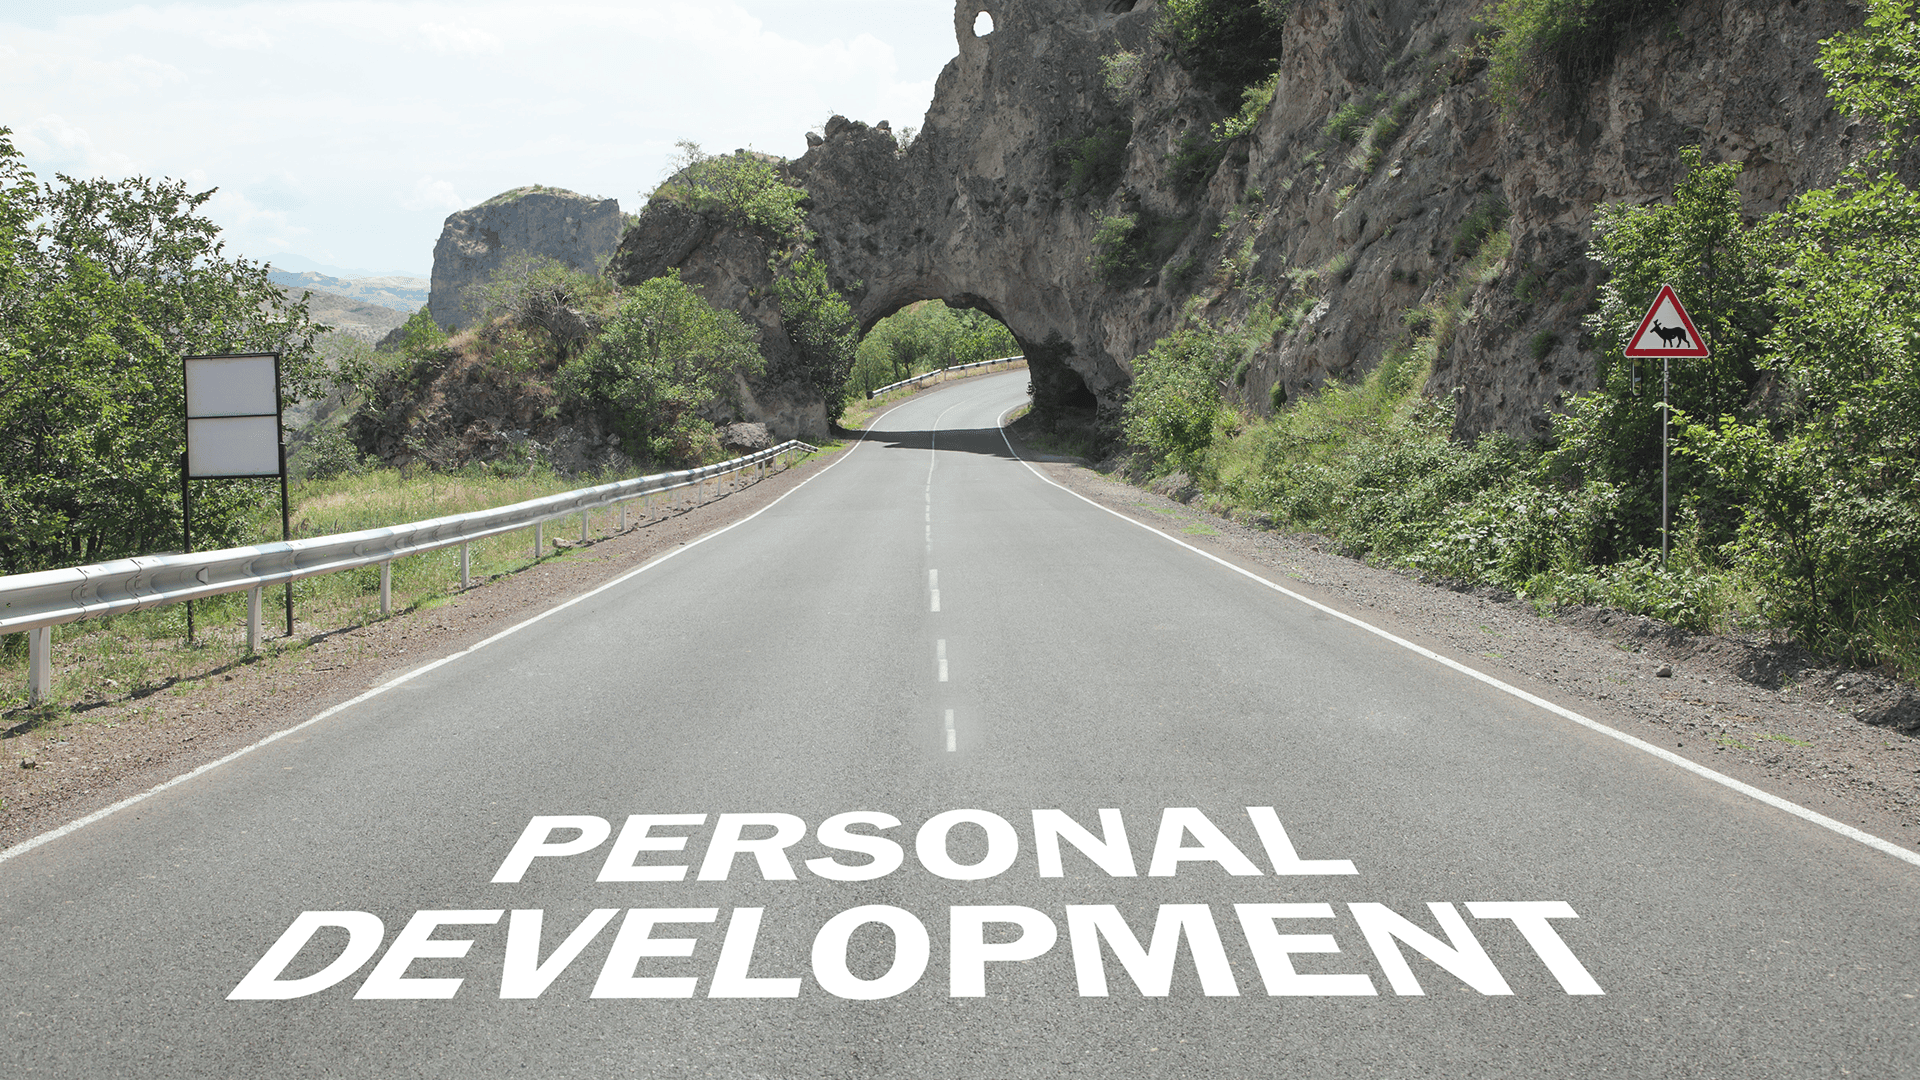 Road to represent the path to personal and professional development